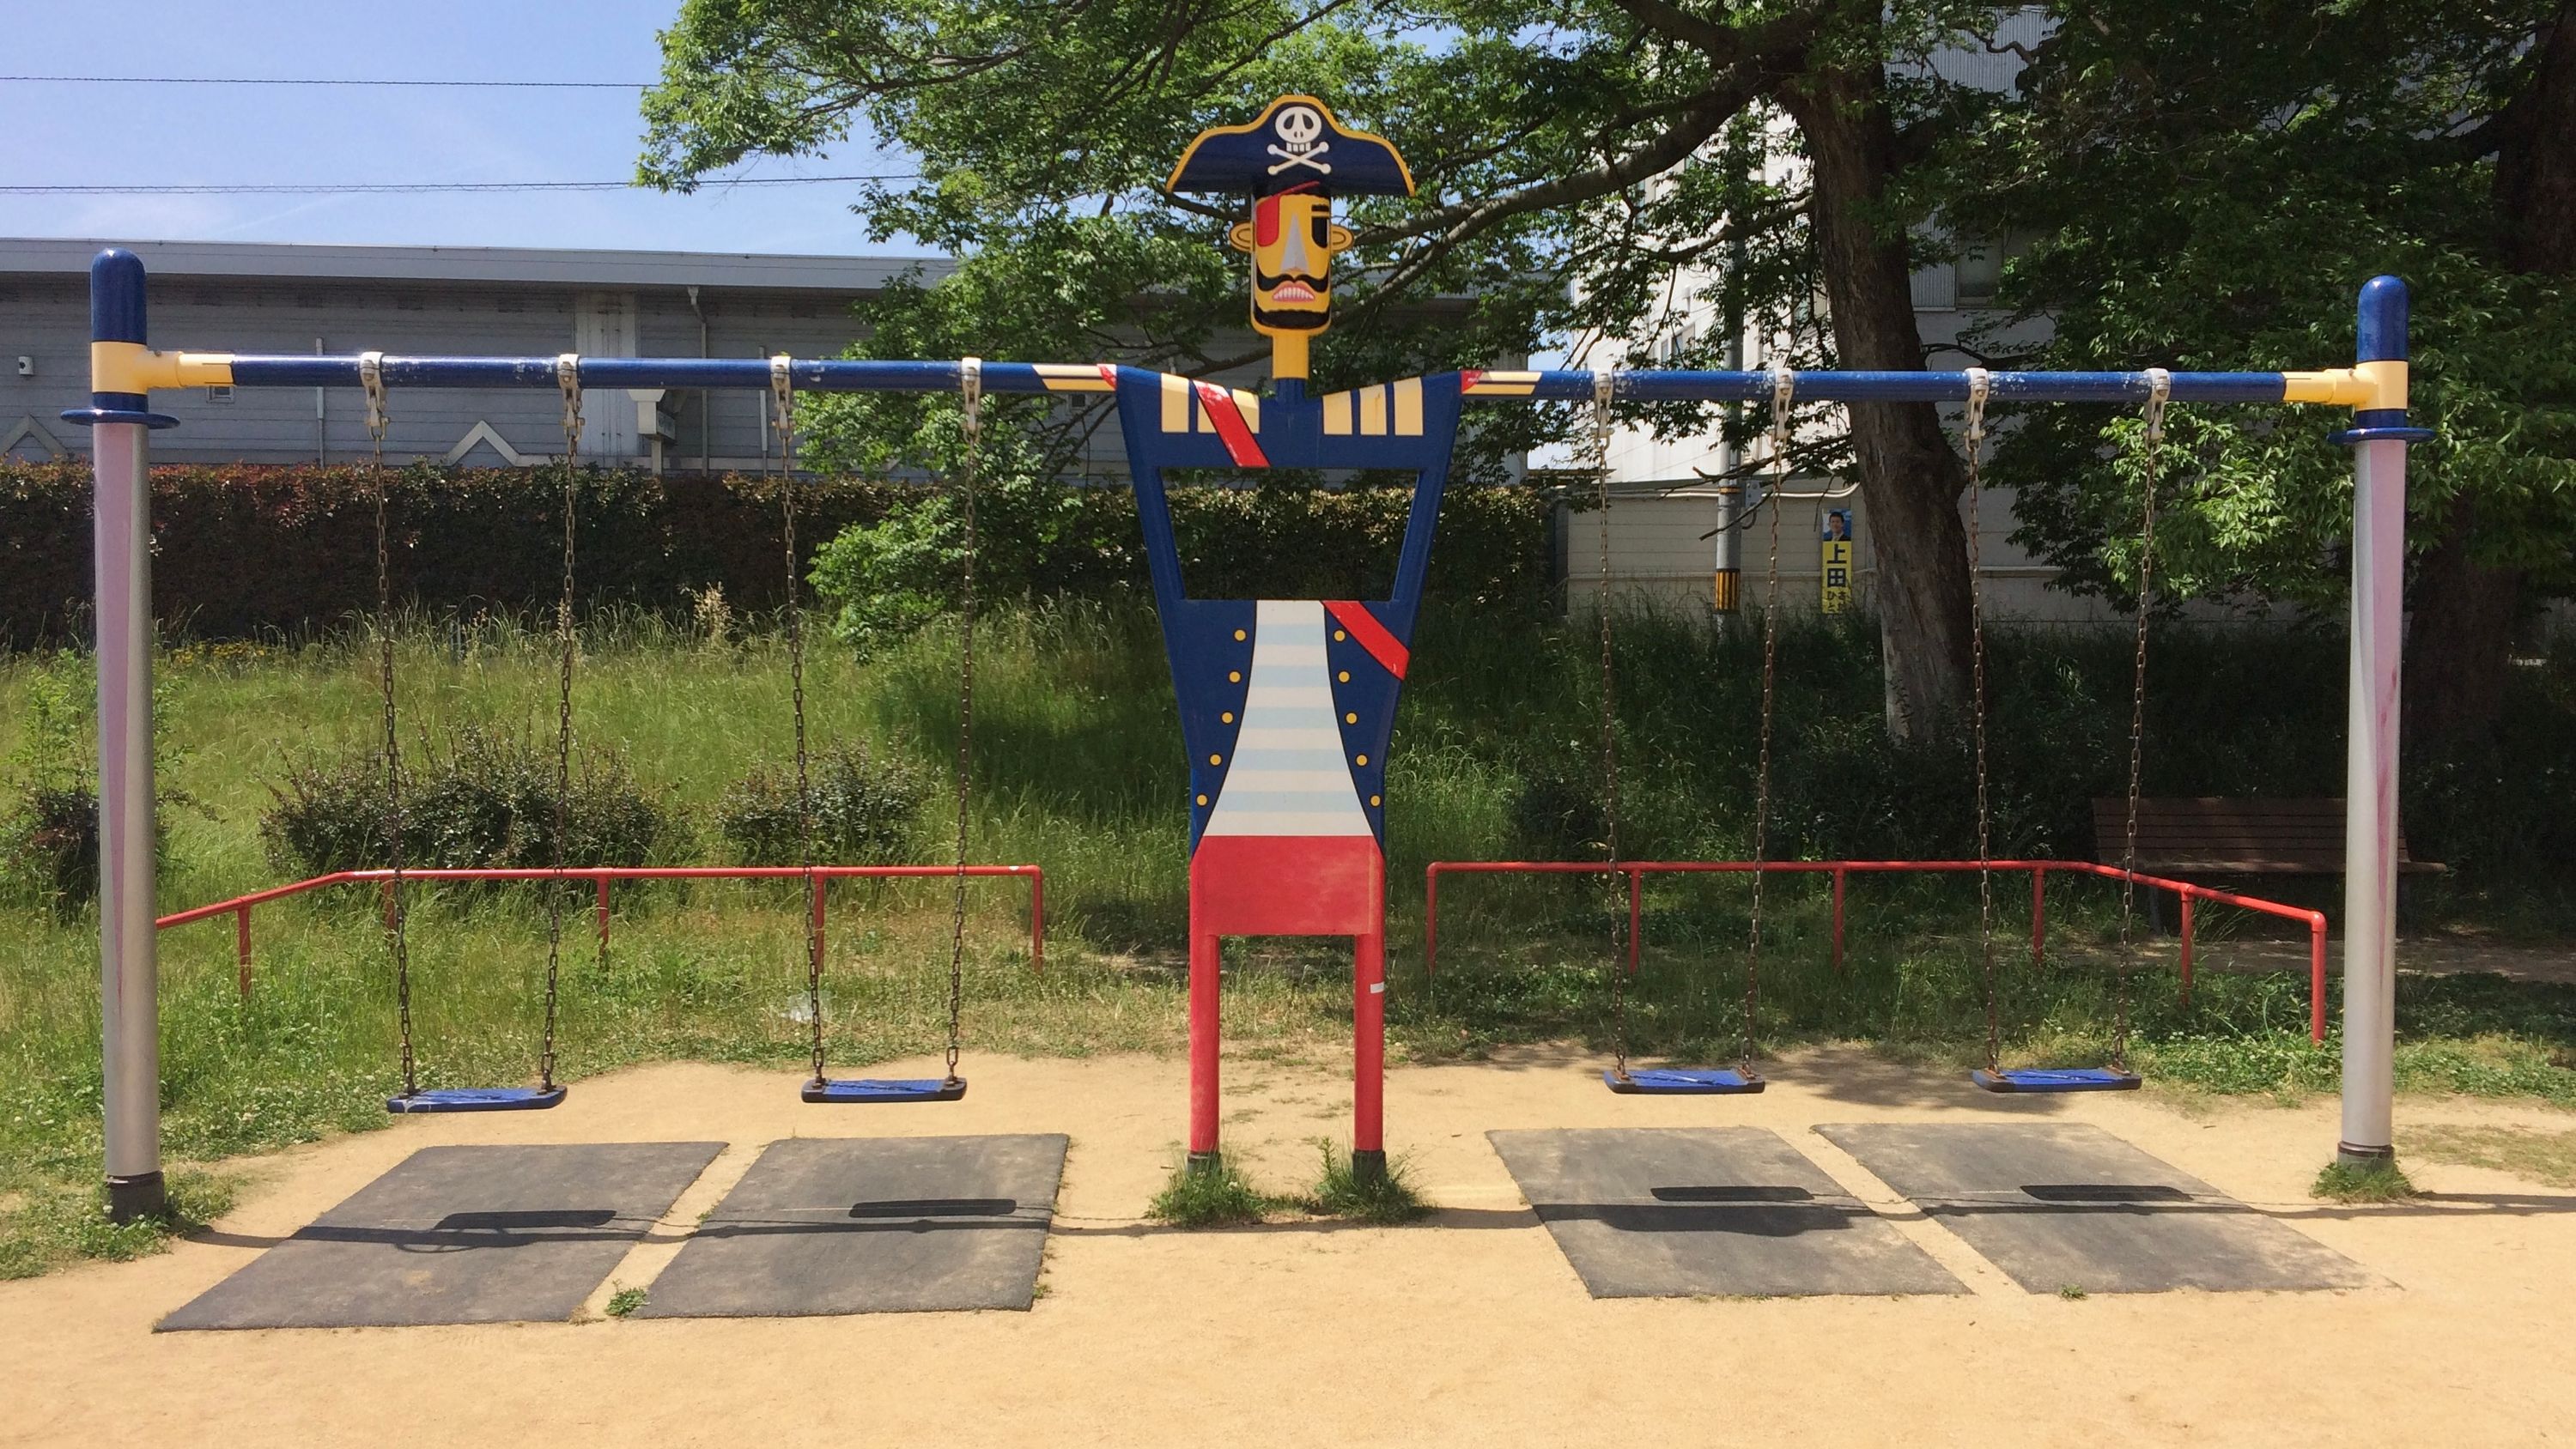 A figure of a pirate with very long arms holds four swings at a playground.